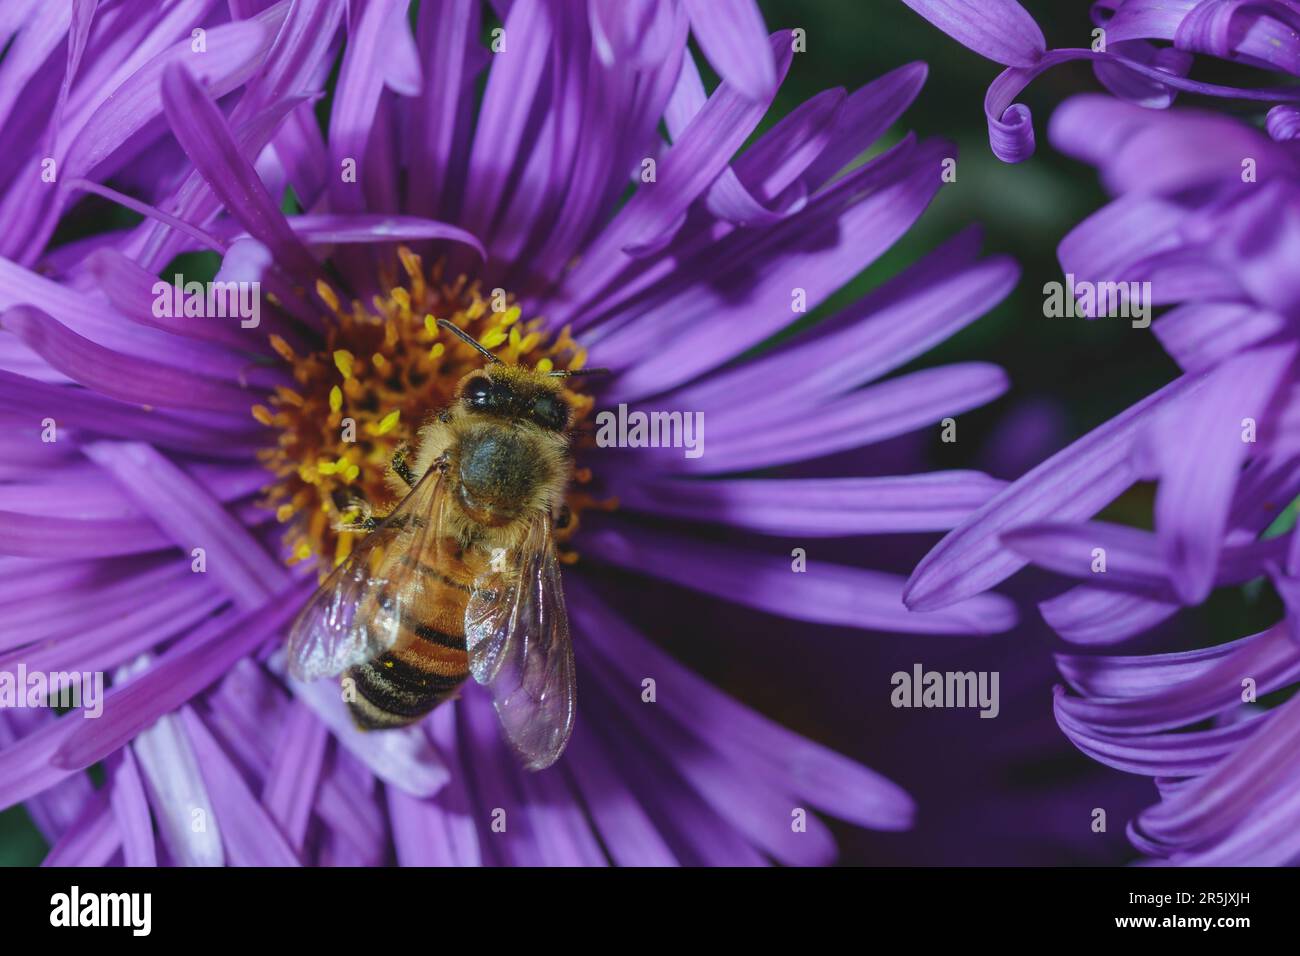 A bumblebee covered in pollen on a purple flower in autumn Stock Photo